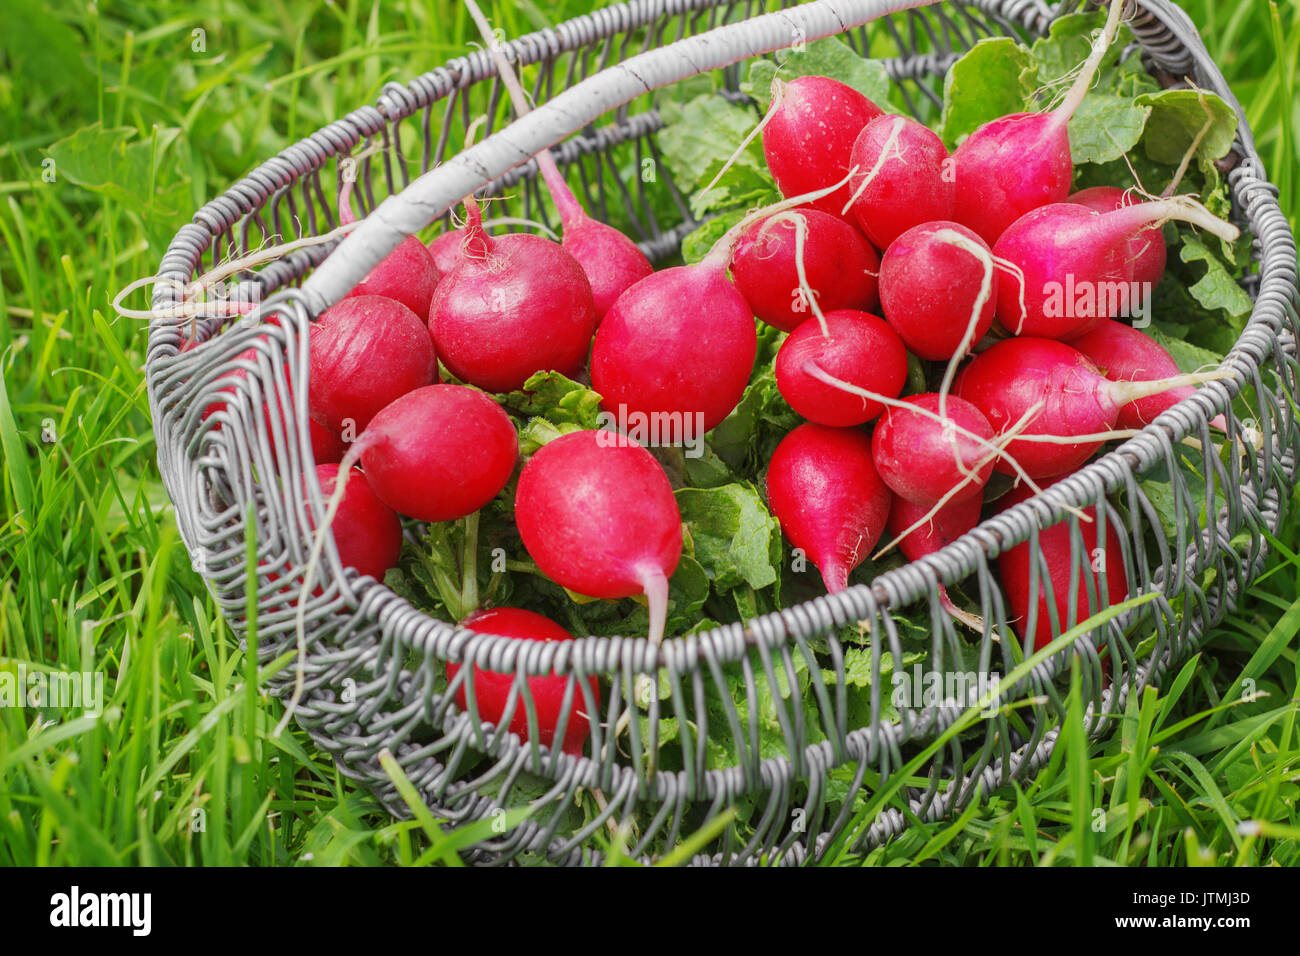 Bunch of fresh red garden radish in a basket in the garden on the grass Stock Photo